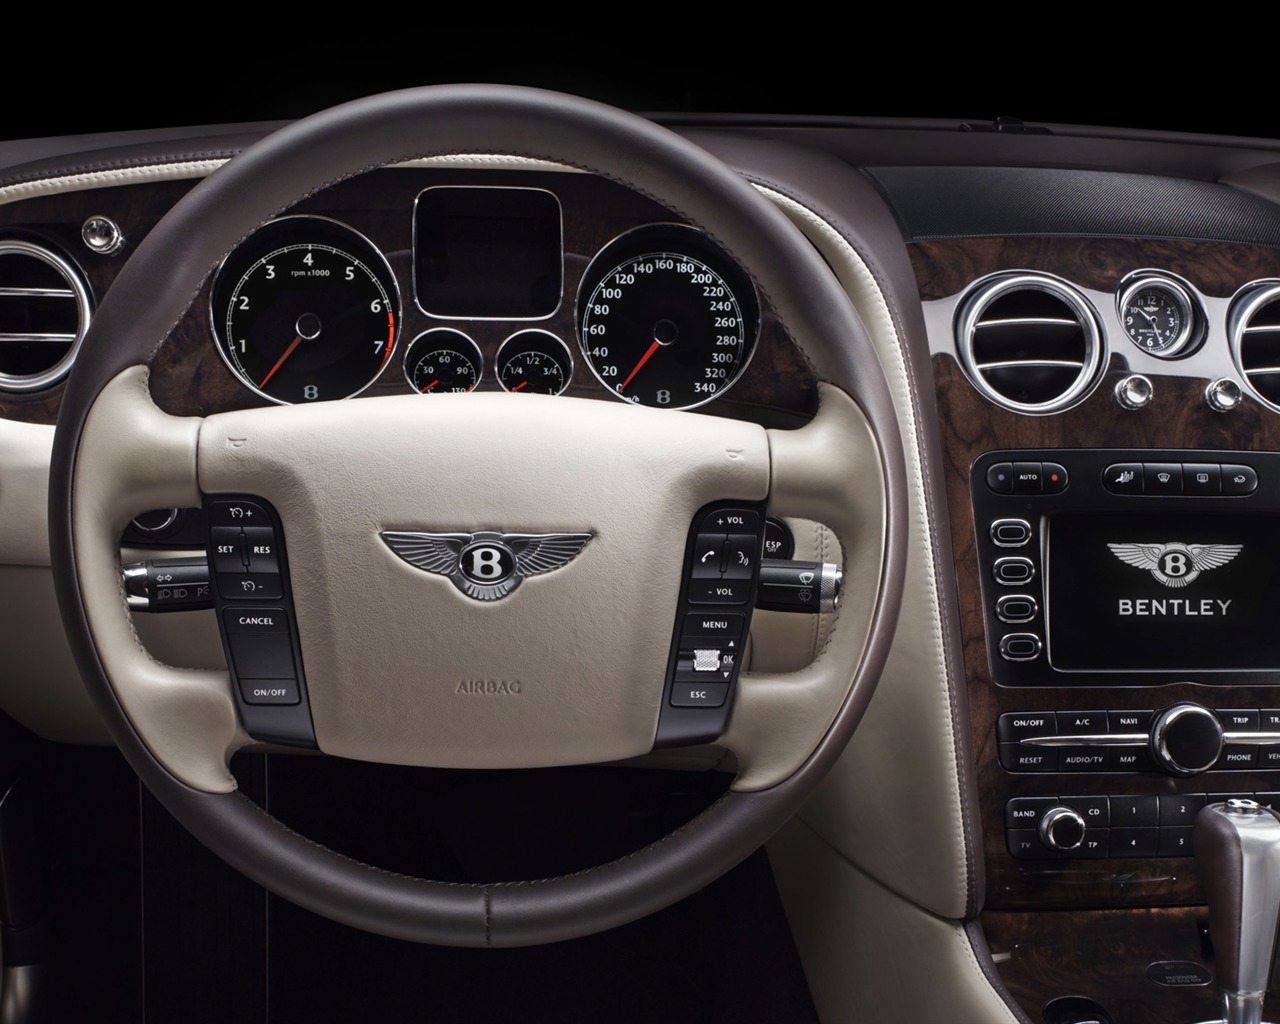 Bentley Continental Flying Spur - 2008 宾利21 - 1280x1024